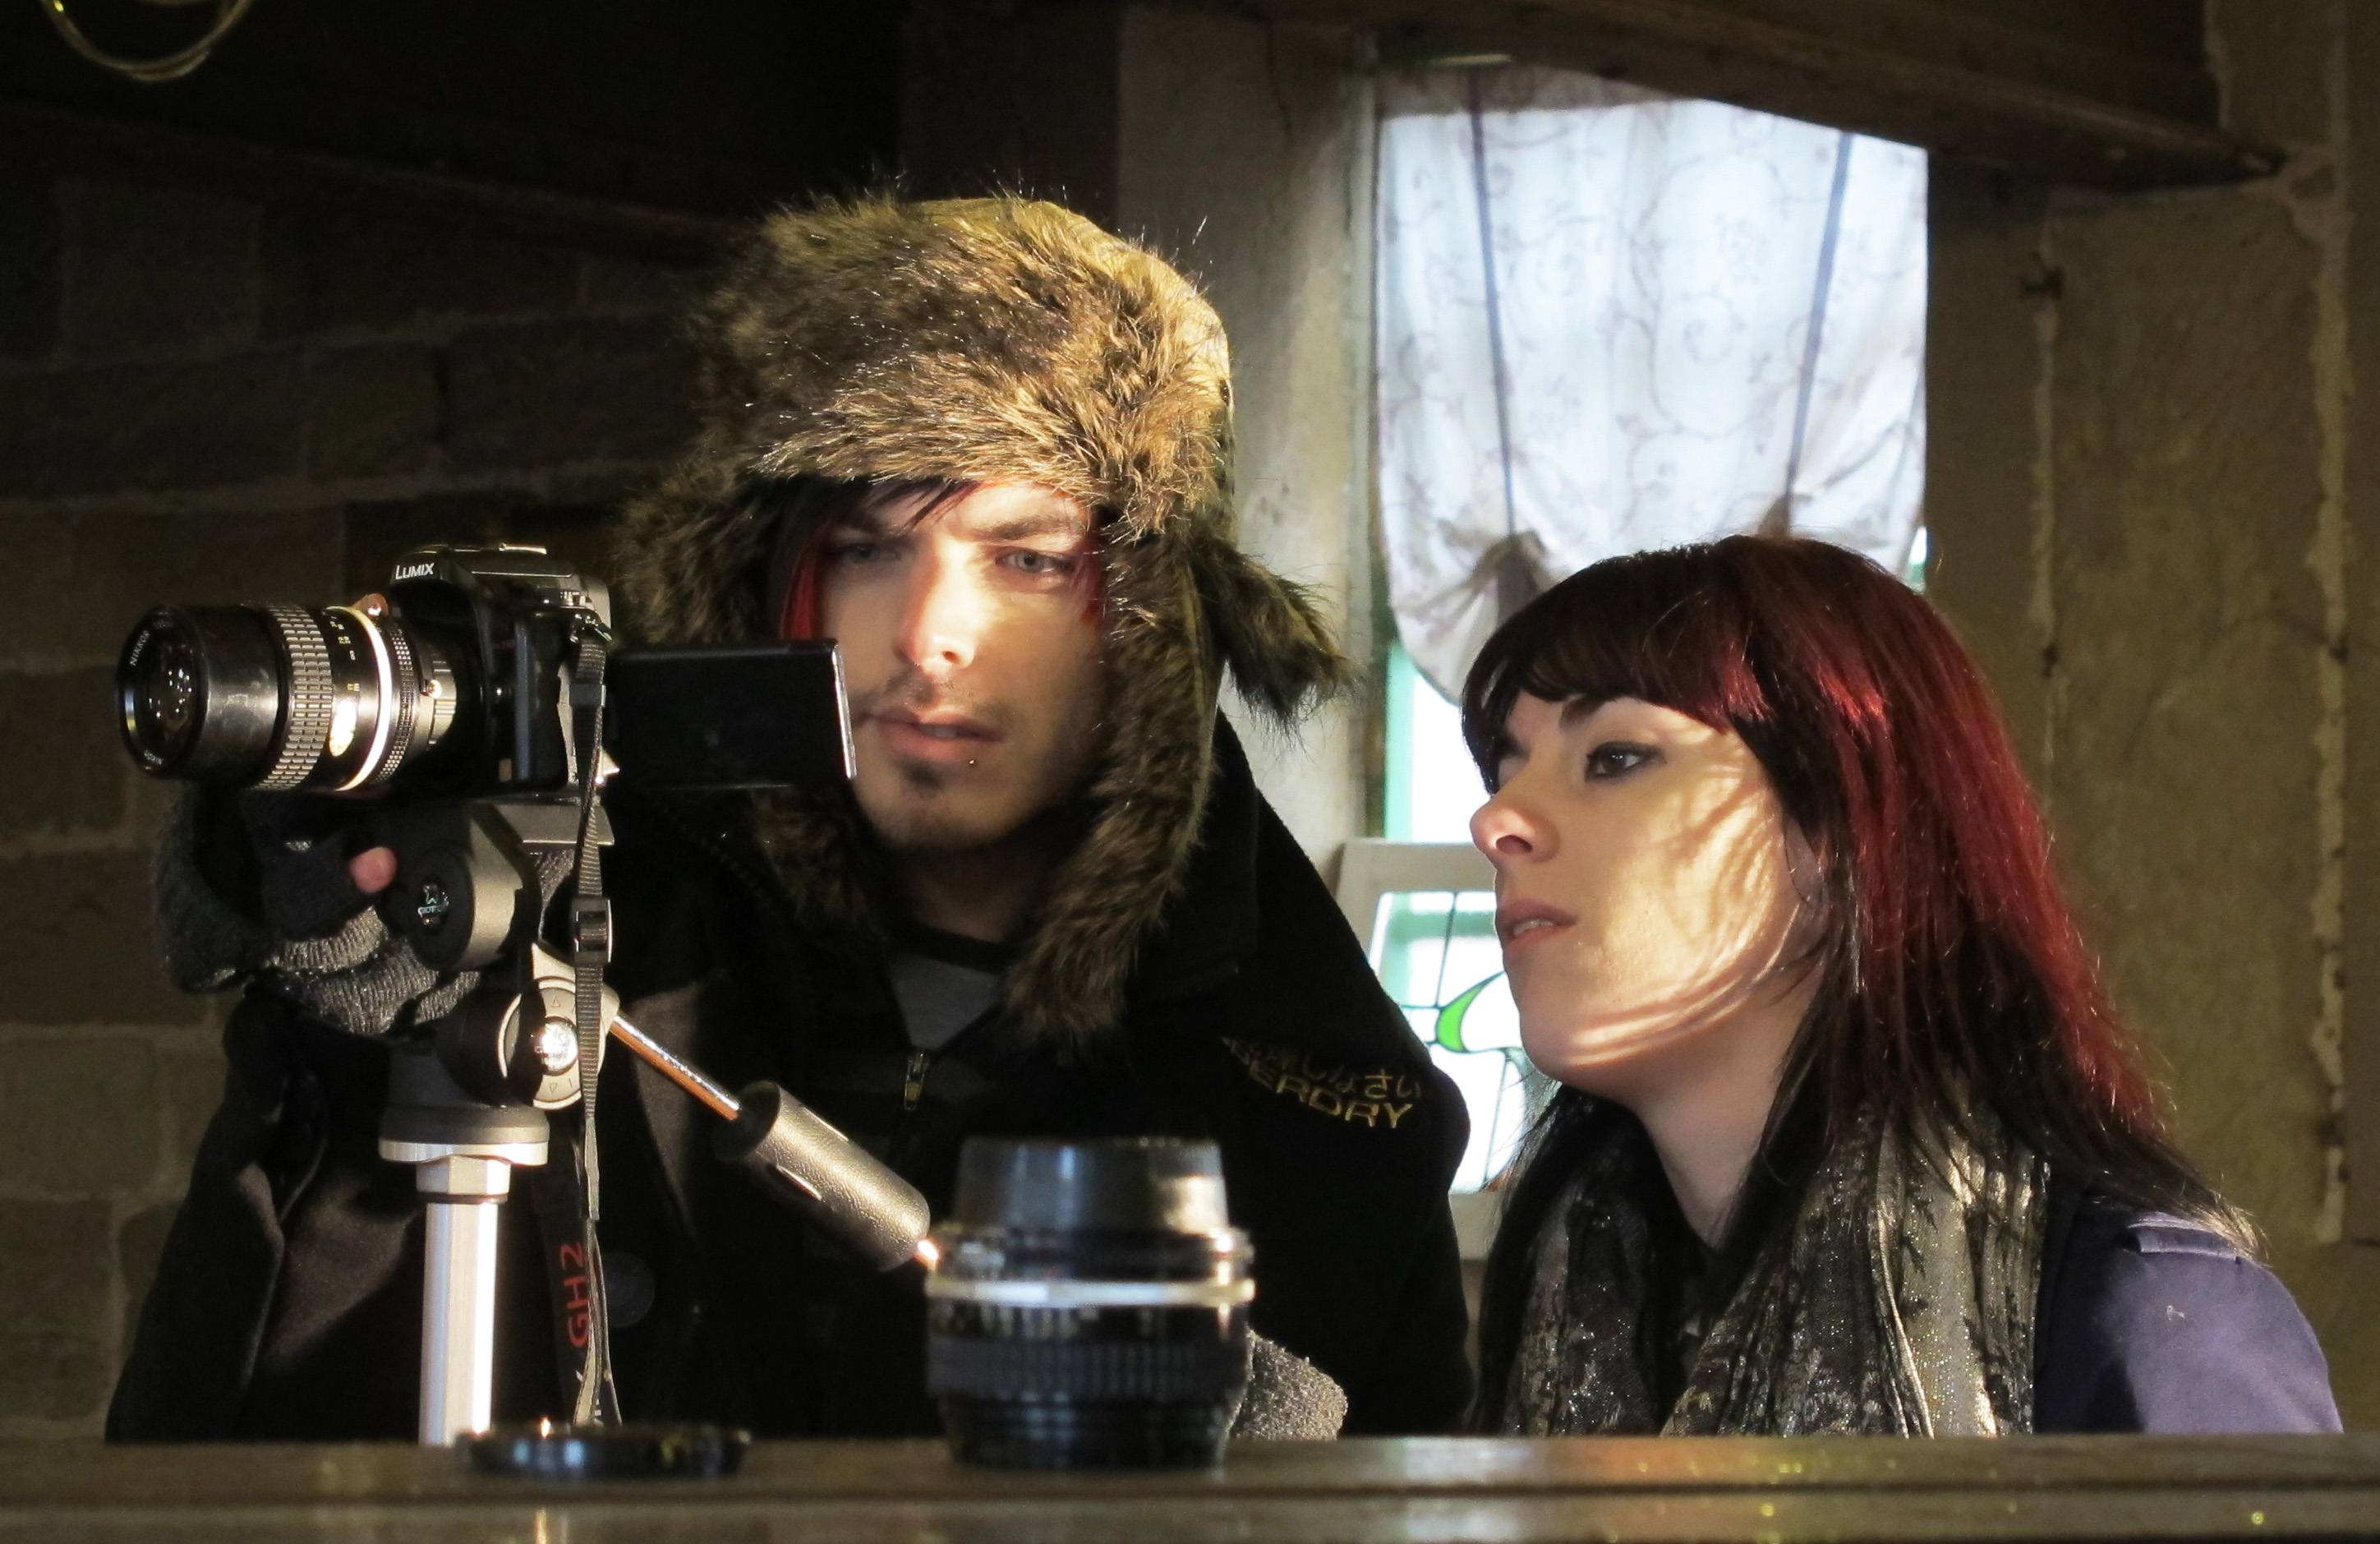 Shooting the 'Halo Haynes music video' with cinematographer Christopher Newman, February 2013.